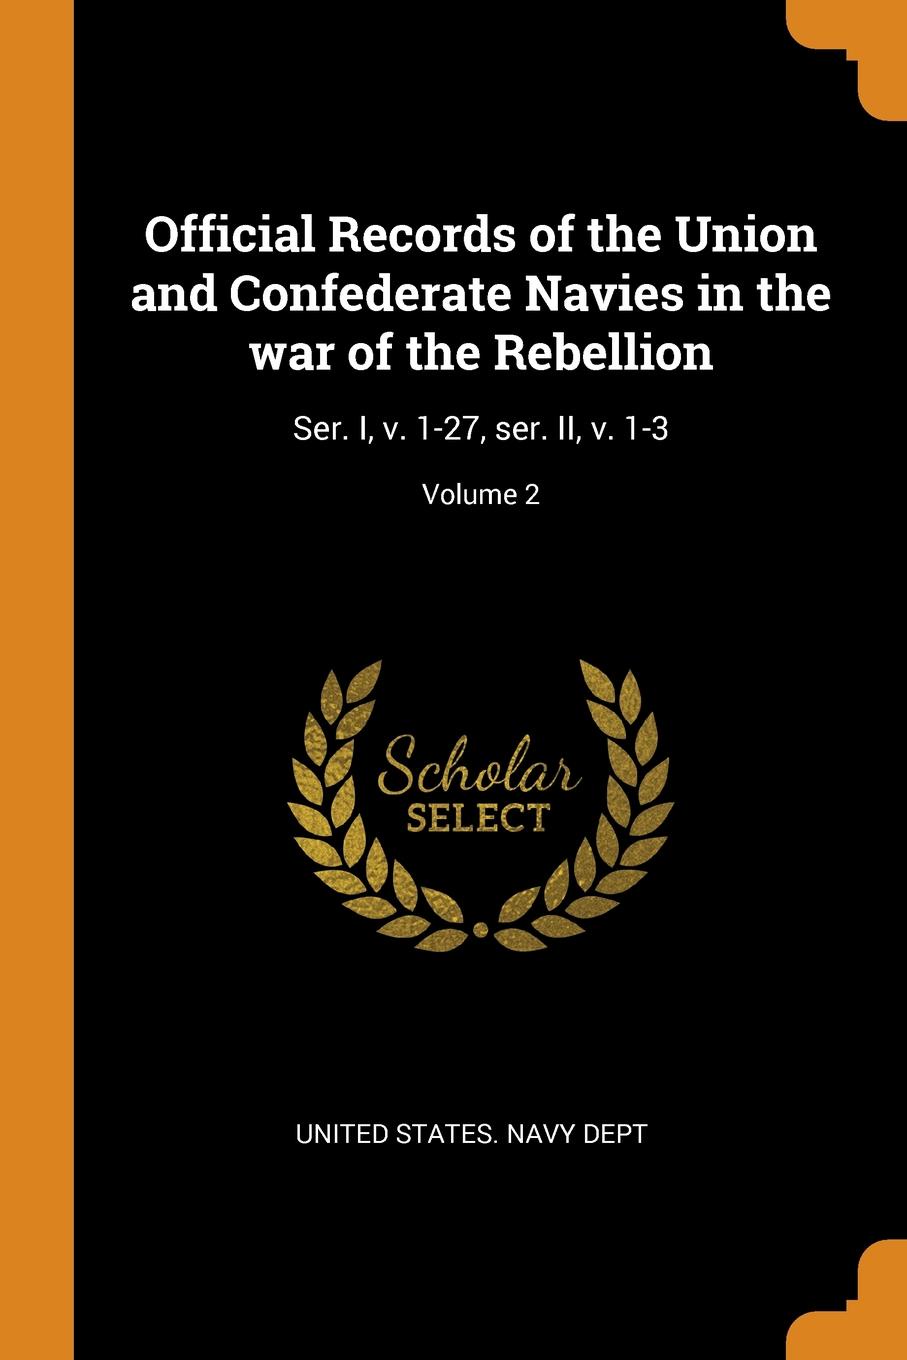 фото Official Records of the Union and Confederate Navies in the war of the Rebellion. Ser. I, v. 1-27, ser. II, v. 1-3; Volume 2